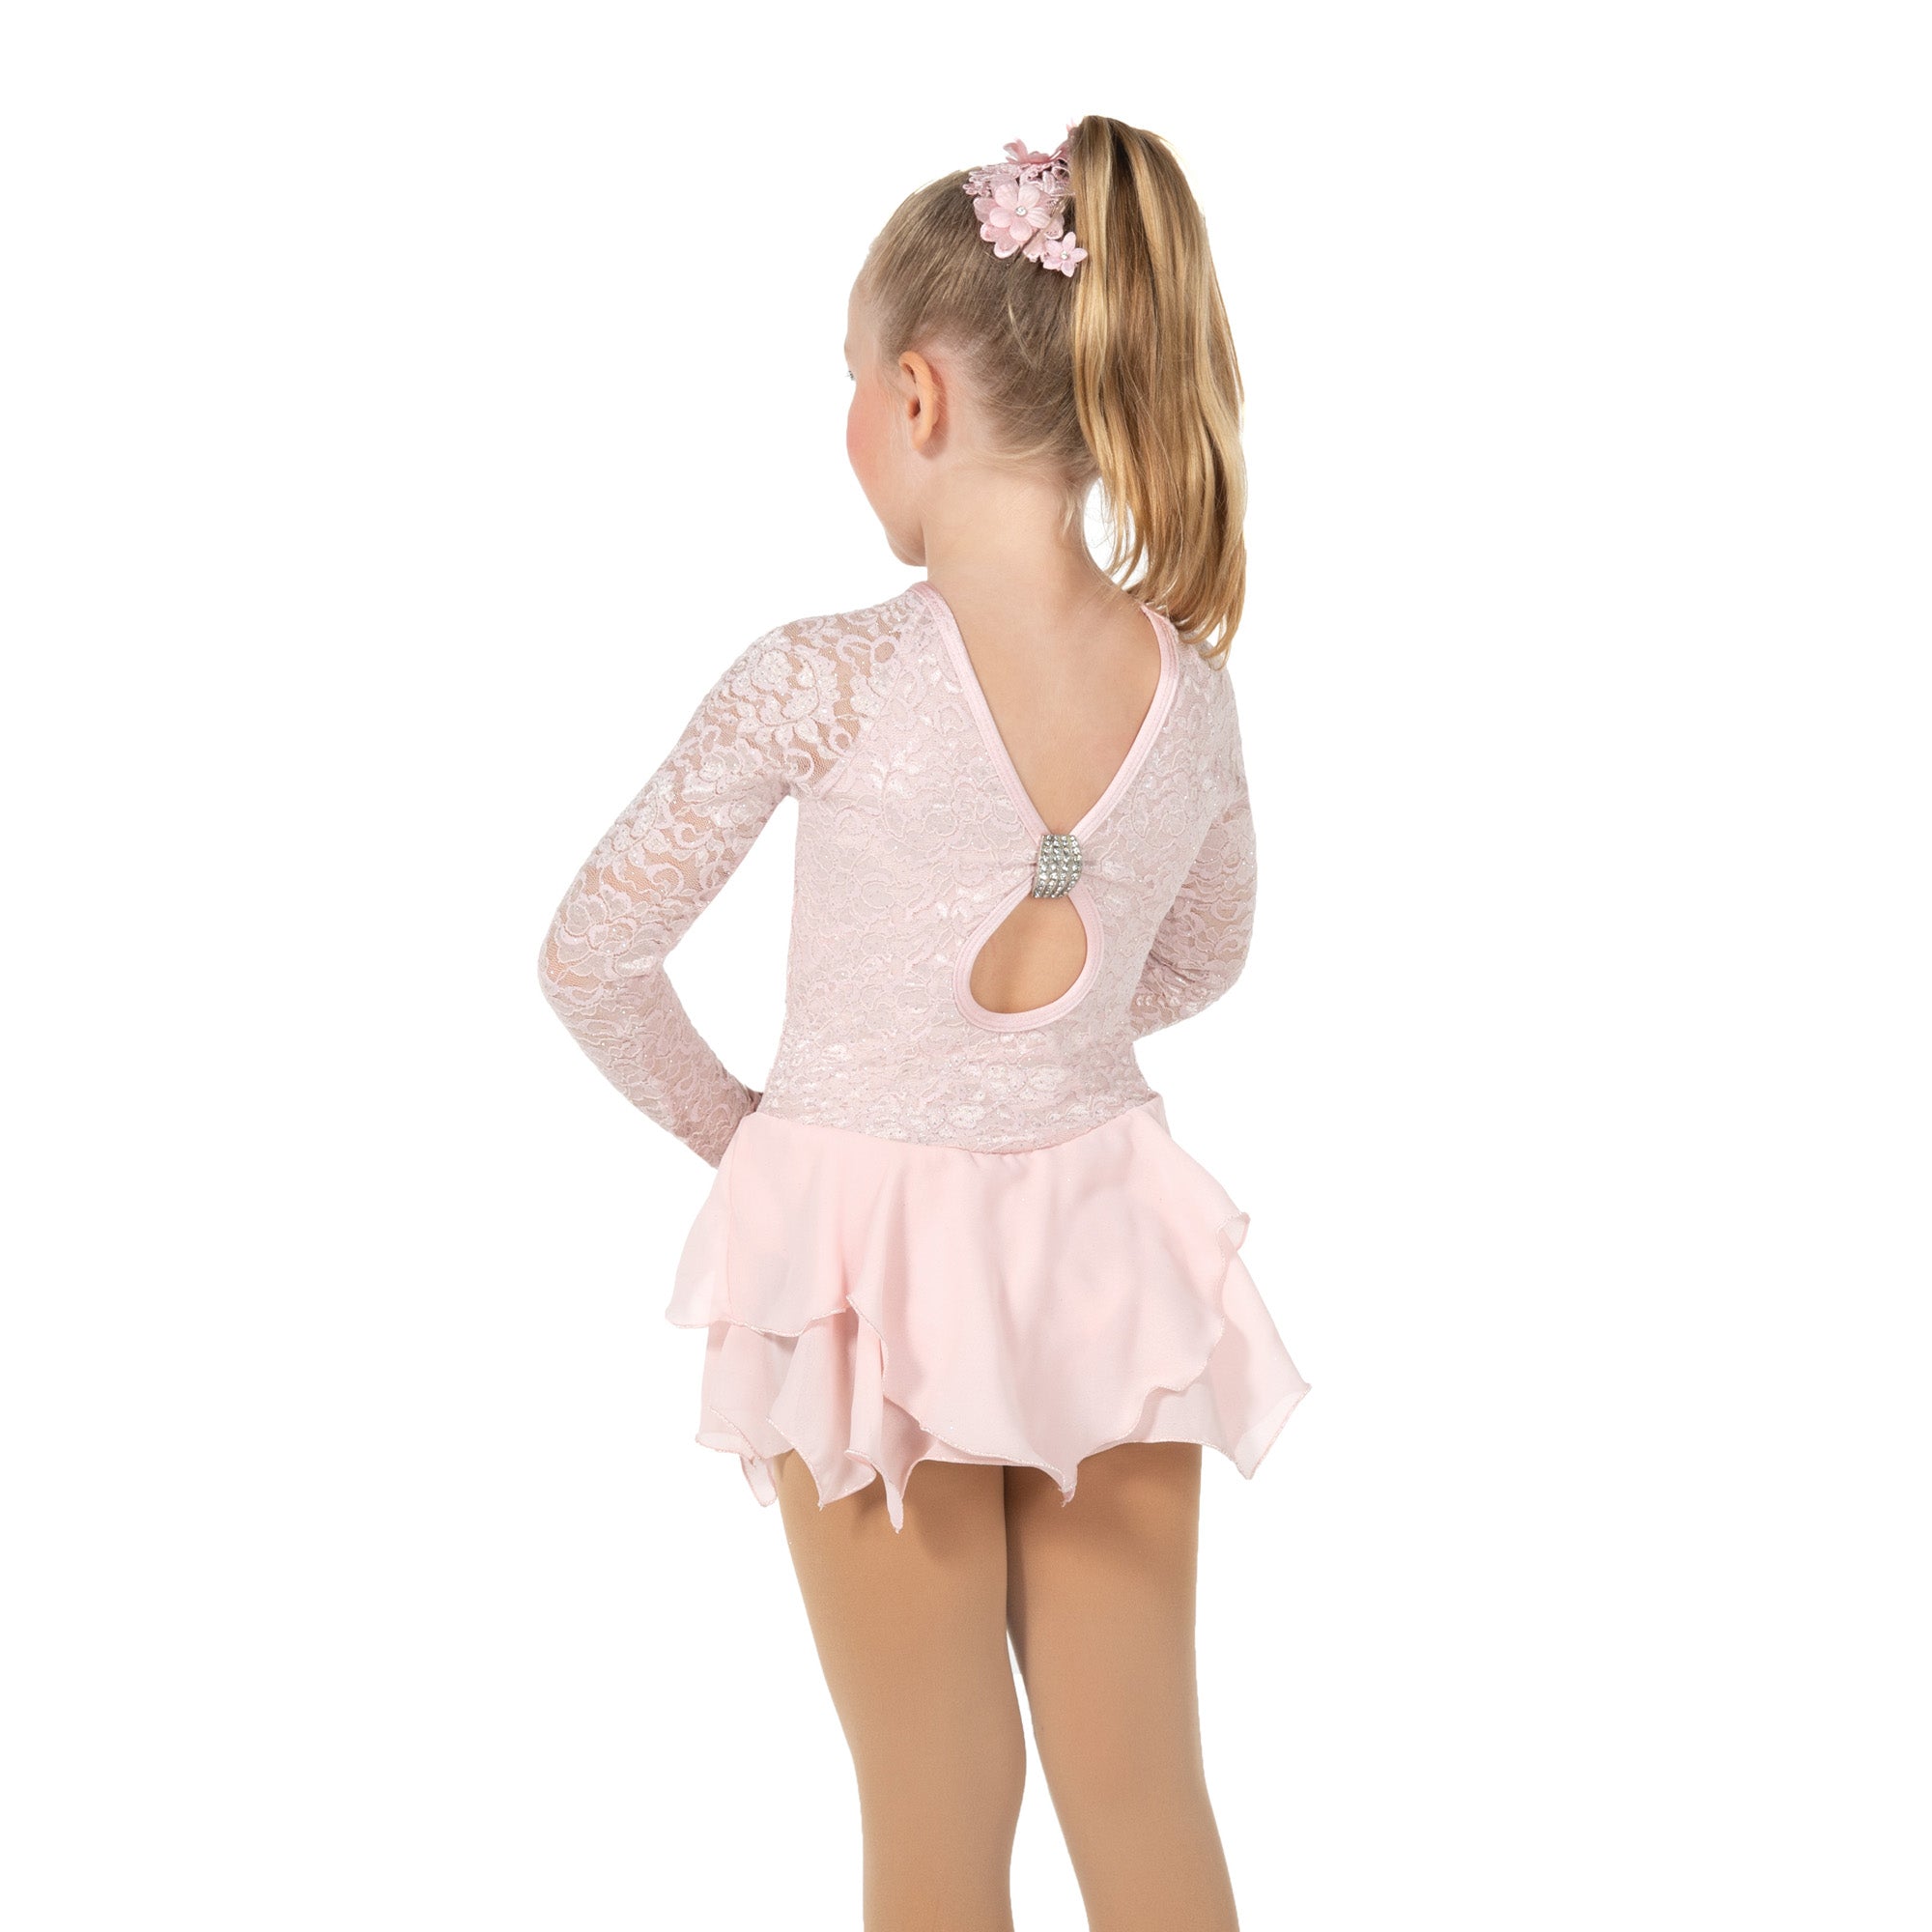 142 Tulip Lace Skating Dress in Pink by Jerry's